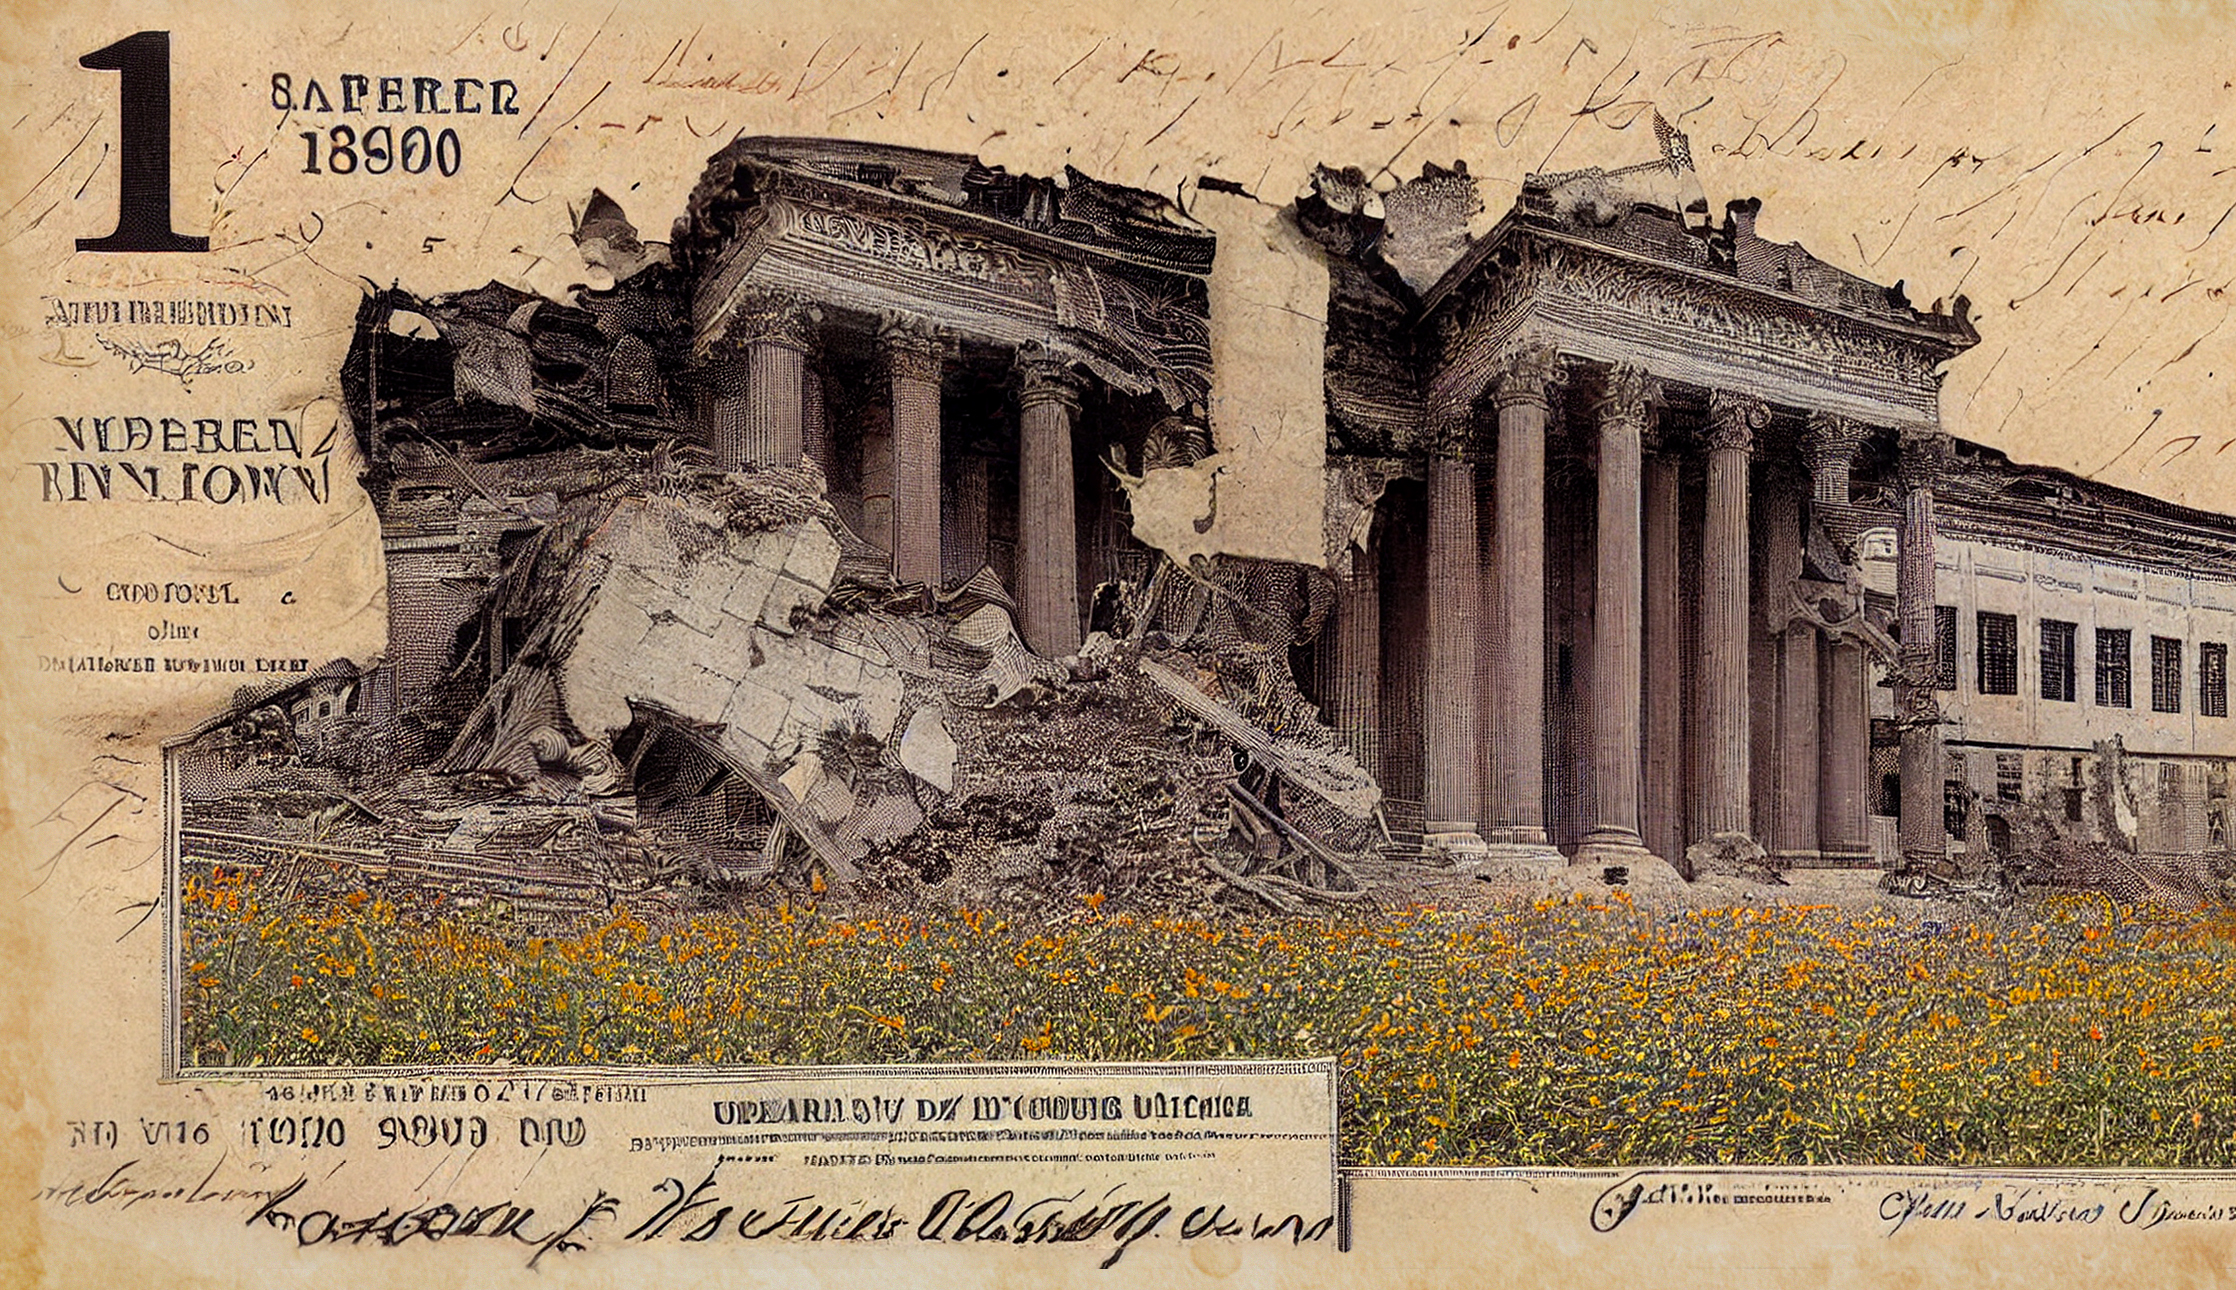 Ruins of a building with yellow flowers in the foreground